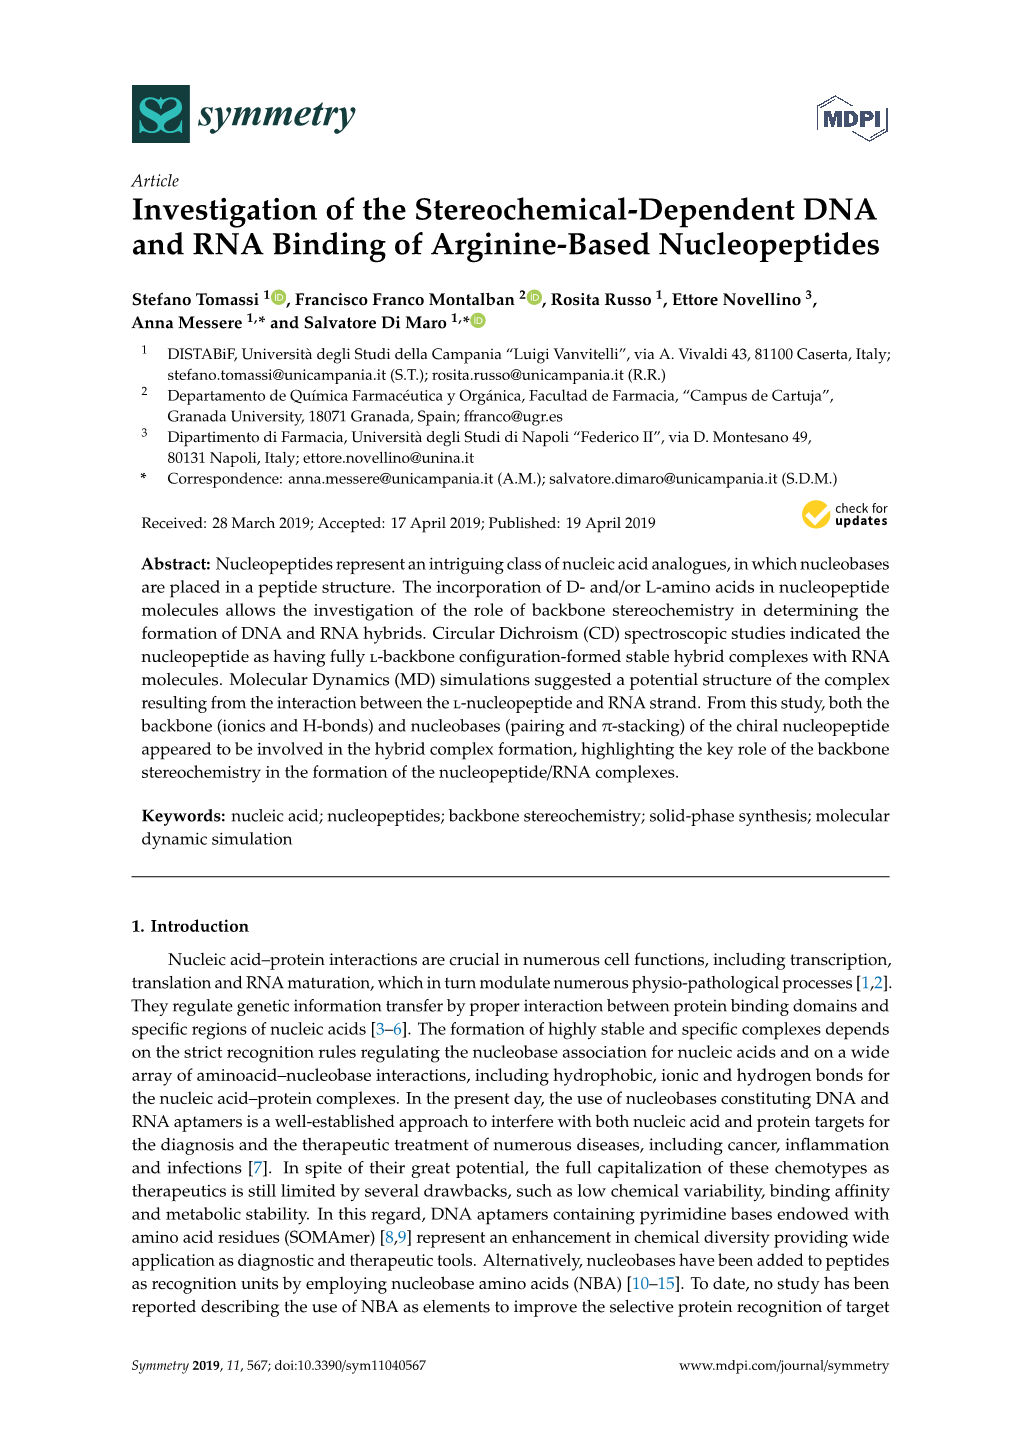 Investigation of the Stereochemical-Dependent DNA and RNA Binding of Arginine-Based Nucleopeptides